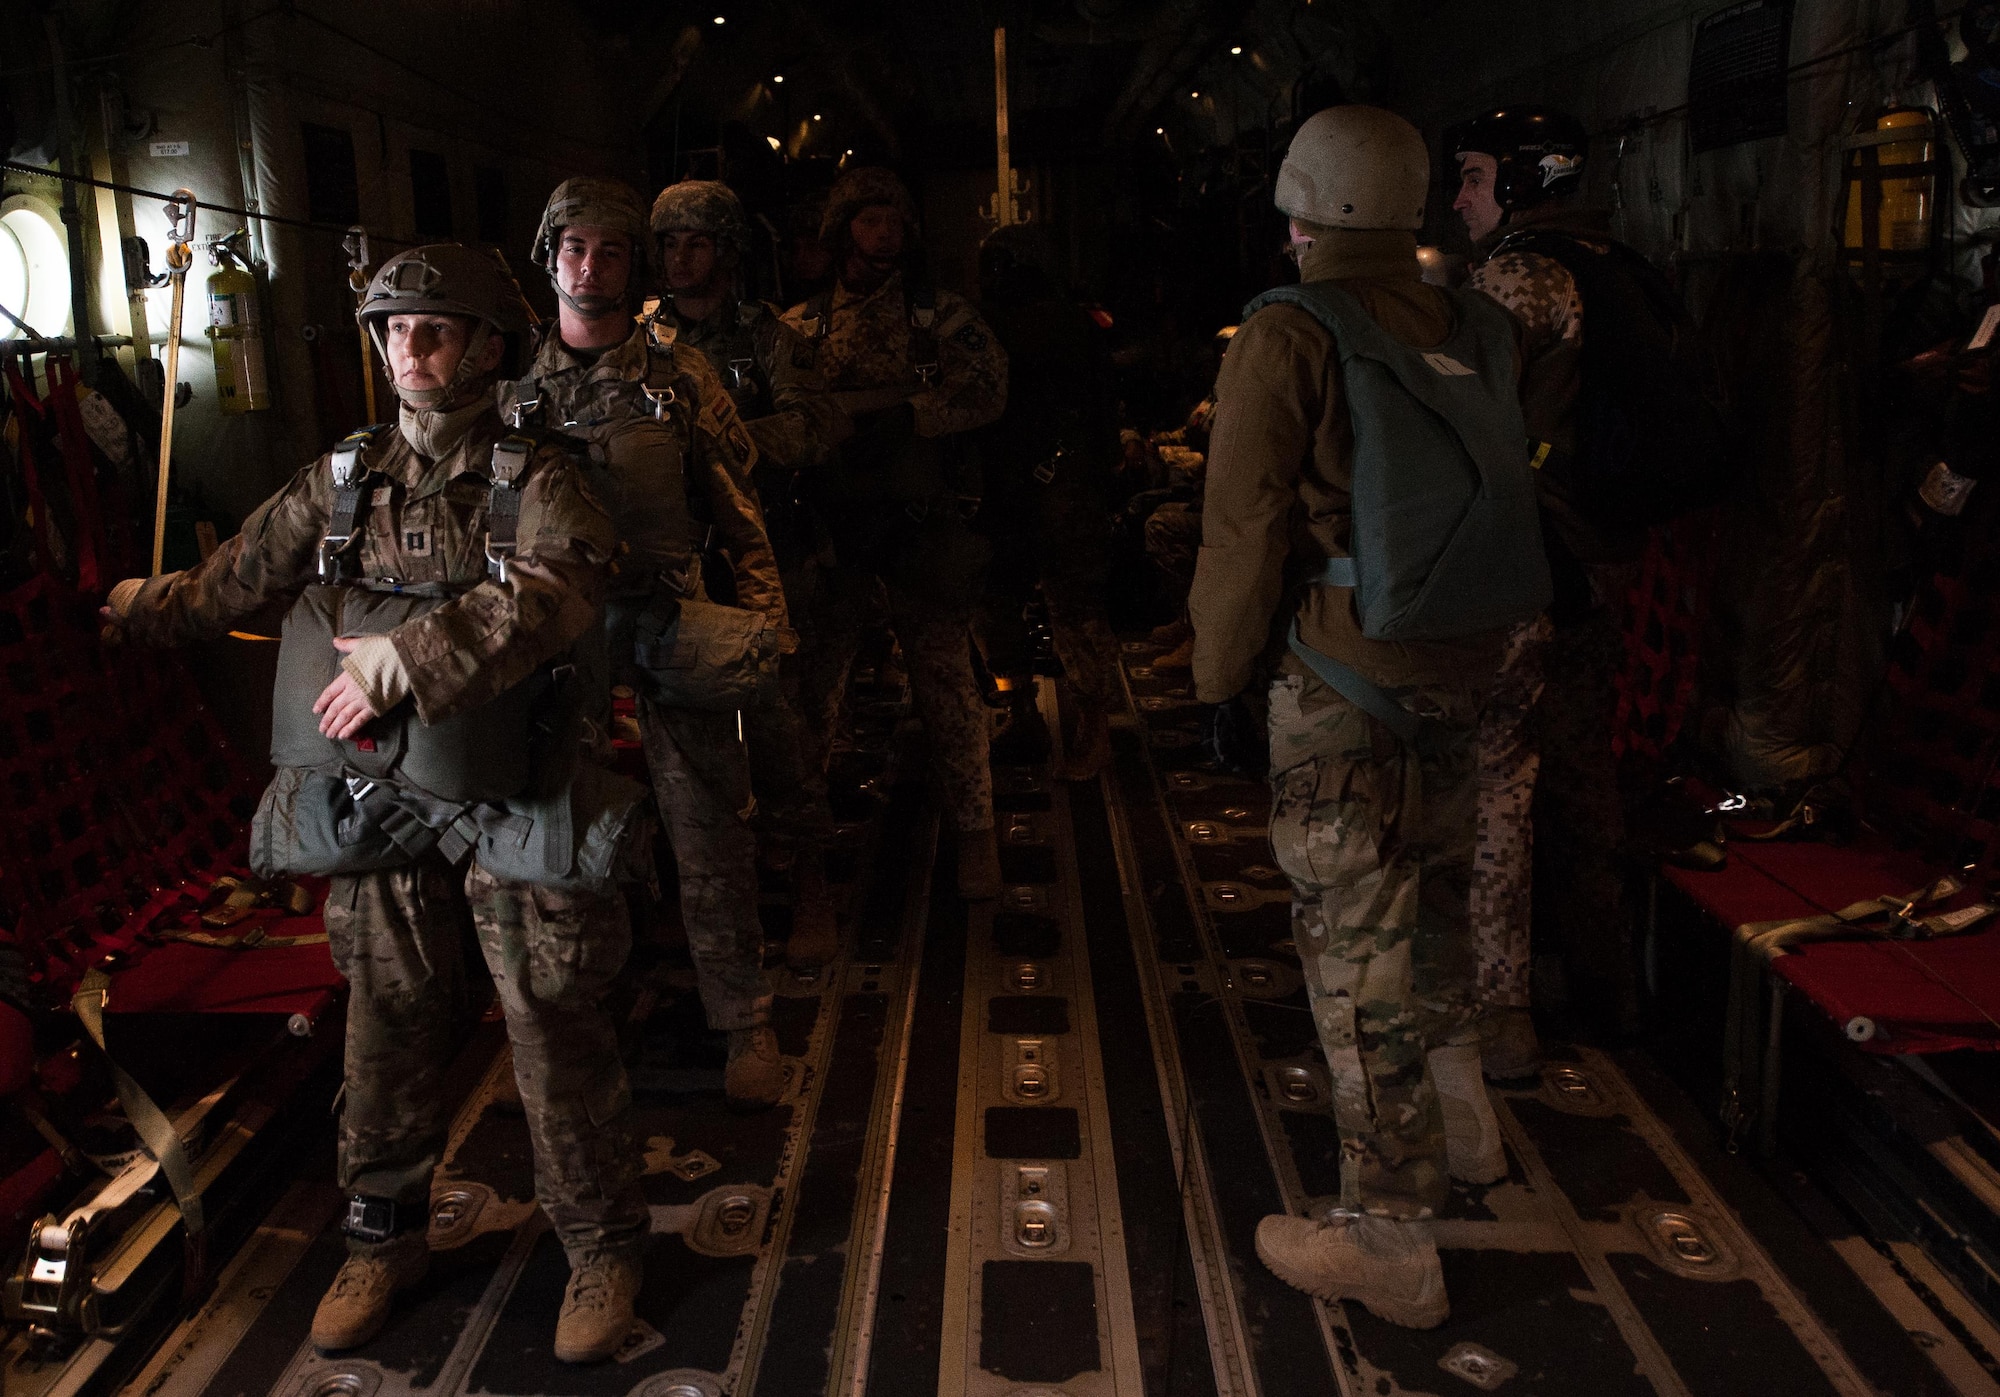 NATO paratroopers stand by on a C-130J Super Hercules before they jump during an International Jump Week exercise over Germany Dec. 1, 2016. The aircraft and aircrew transported more than 50 NATO servicemembers to a drop zone northeast of Ramstein Air Base, Germany as part of multi-national training. (U.S. Air Force photo by Airman 1st Class Lane T. Plummer)